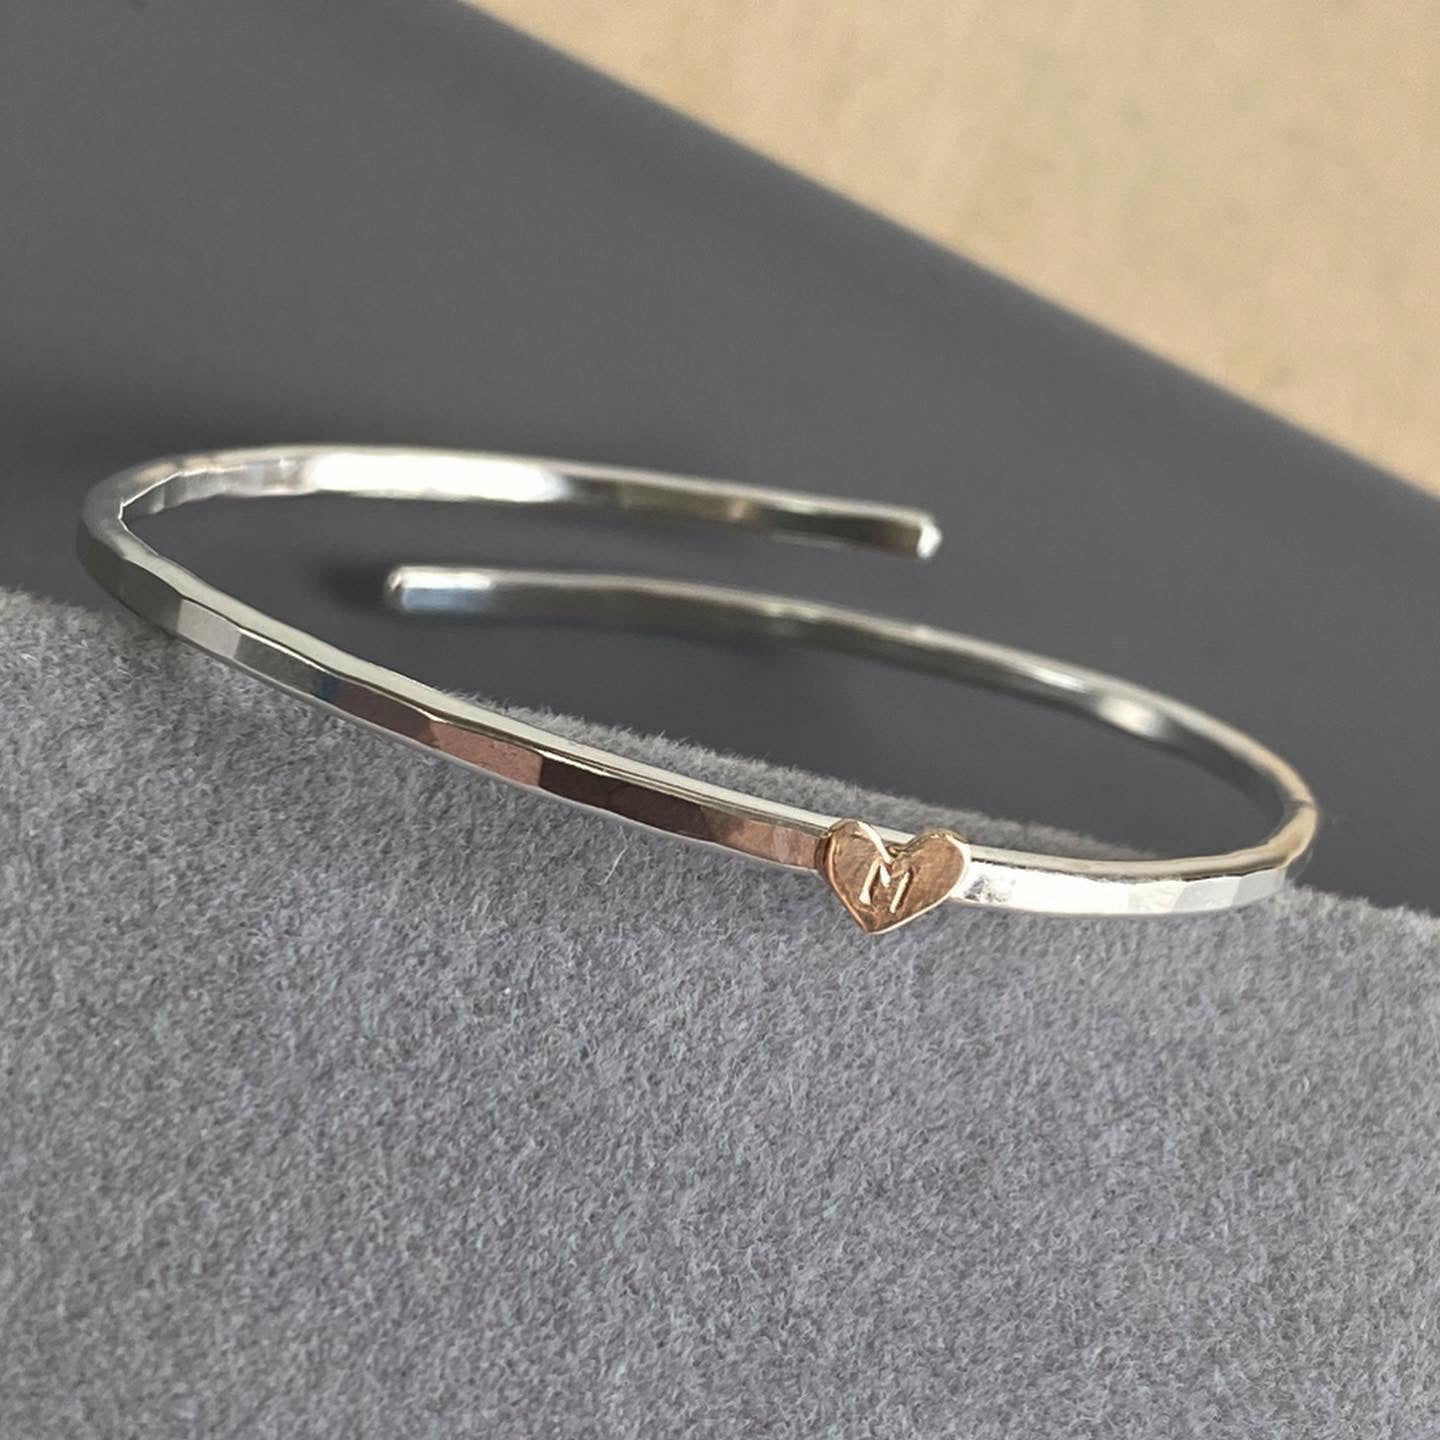 Baby Bangle - Can be personalised